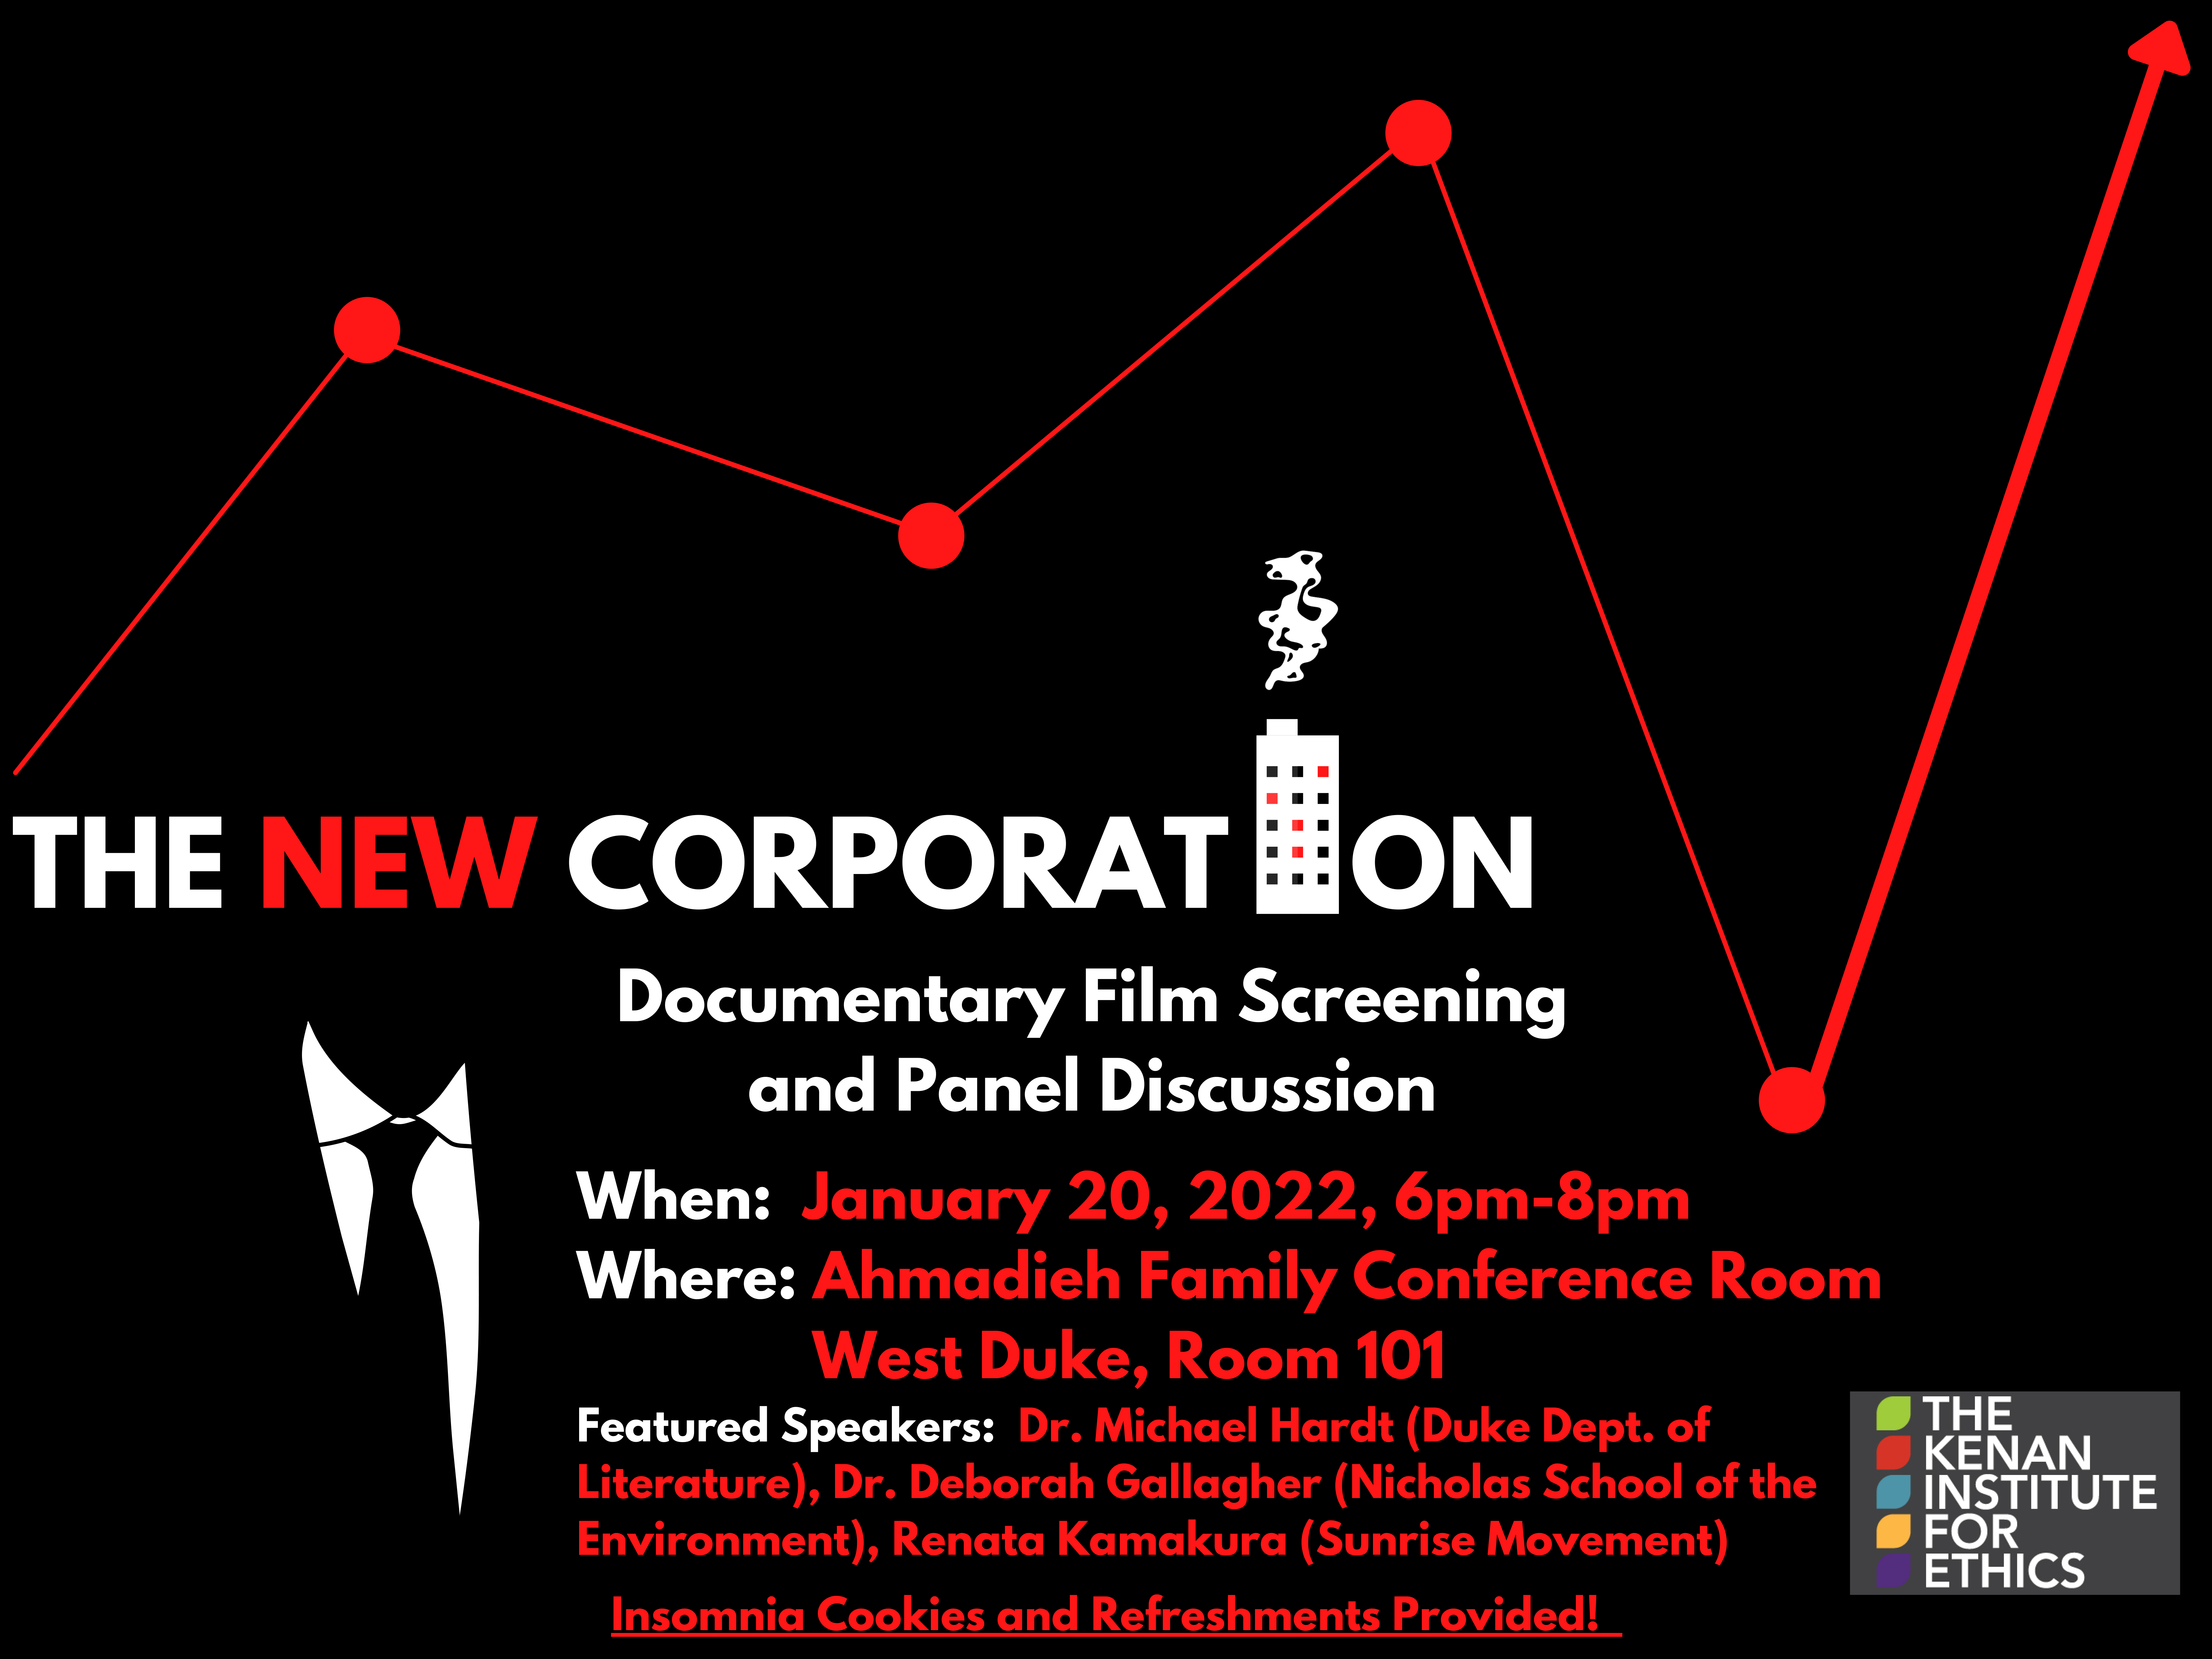 The New Corporation: Documentary Film Screening and Panel Discussion. When: January 20, 2022, 6-8pm. Where: Ahmadieh Family Conference Room, West Duke, Room 101.